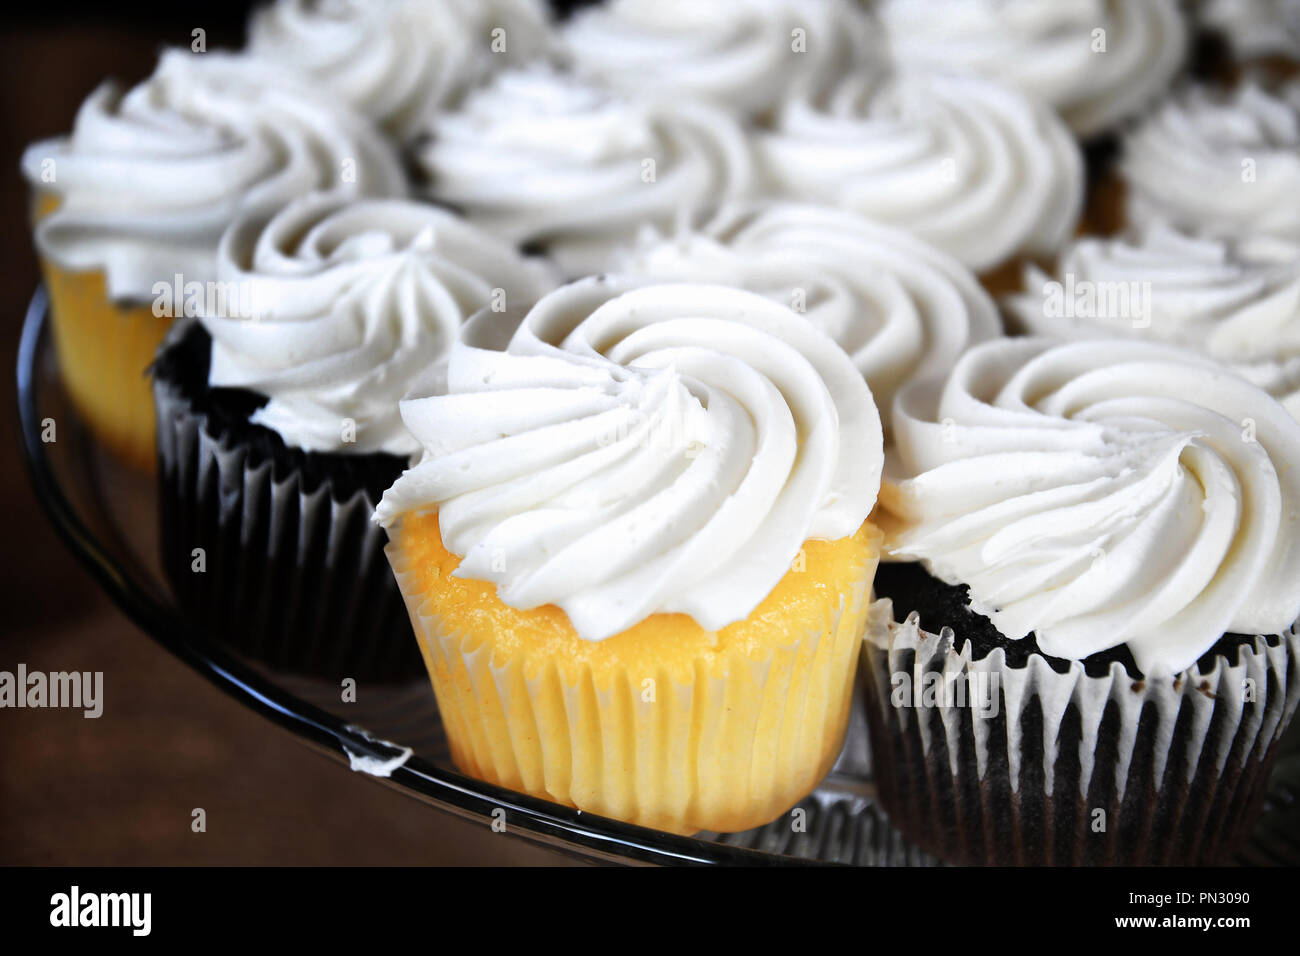 Tray of chocolate and vanilla cupcakes topped with white vanilla frosting Stock Photo